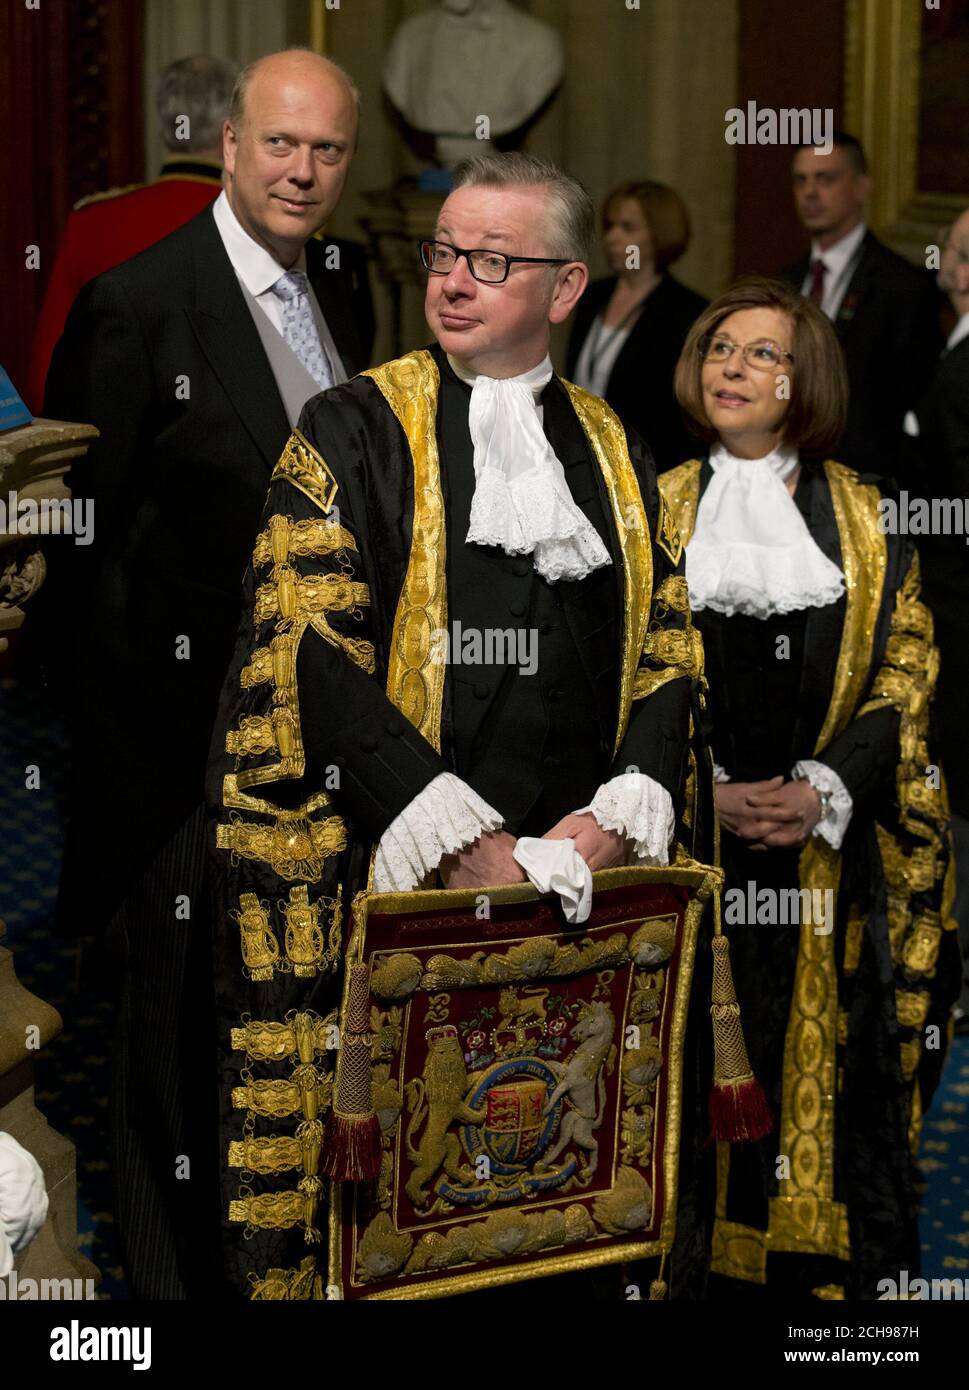 left to right) Leader of the House of Commons Chris Grayling, Justice  Secretary Michael Gove and Lord Speaker Baroness D'Souza in Norman Porch  ahead of the State Opening of Parliament, in the